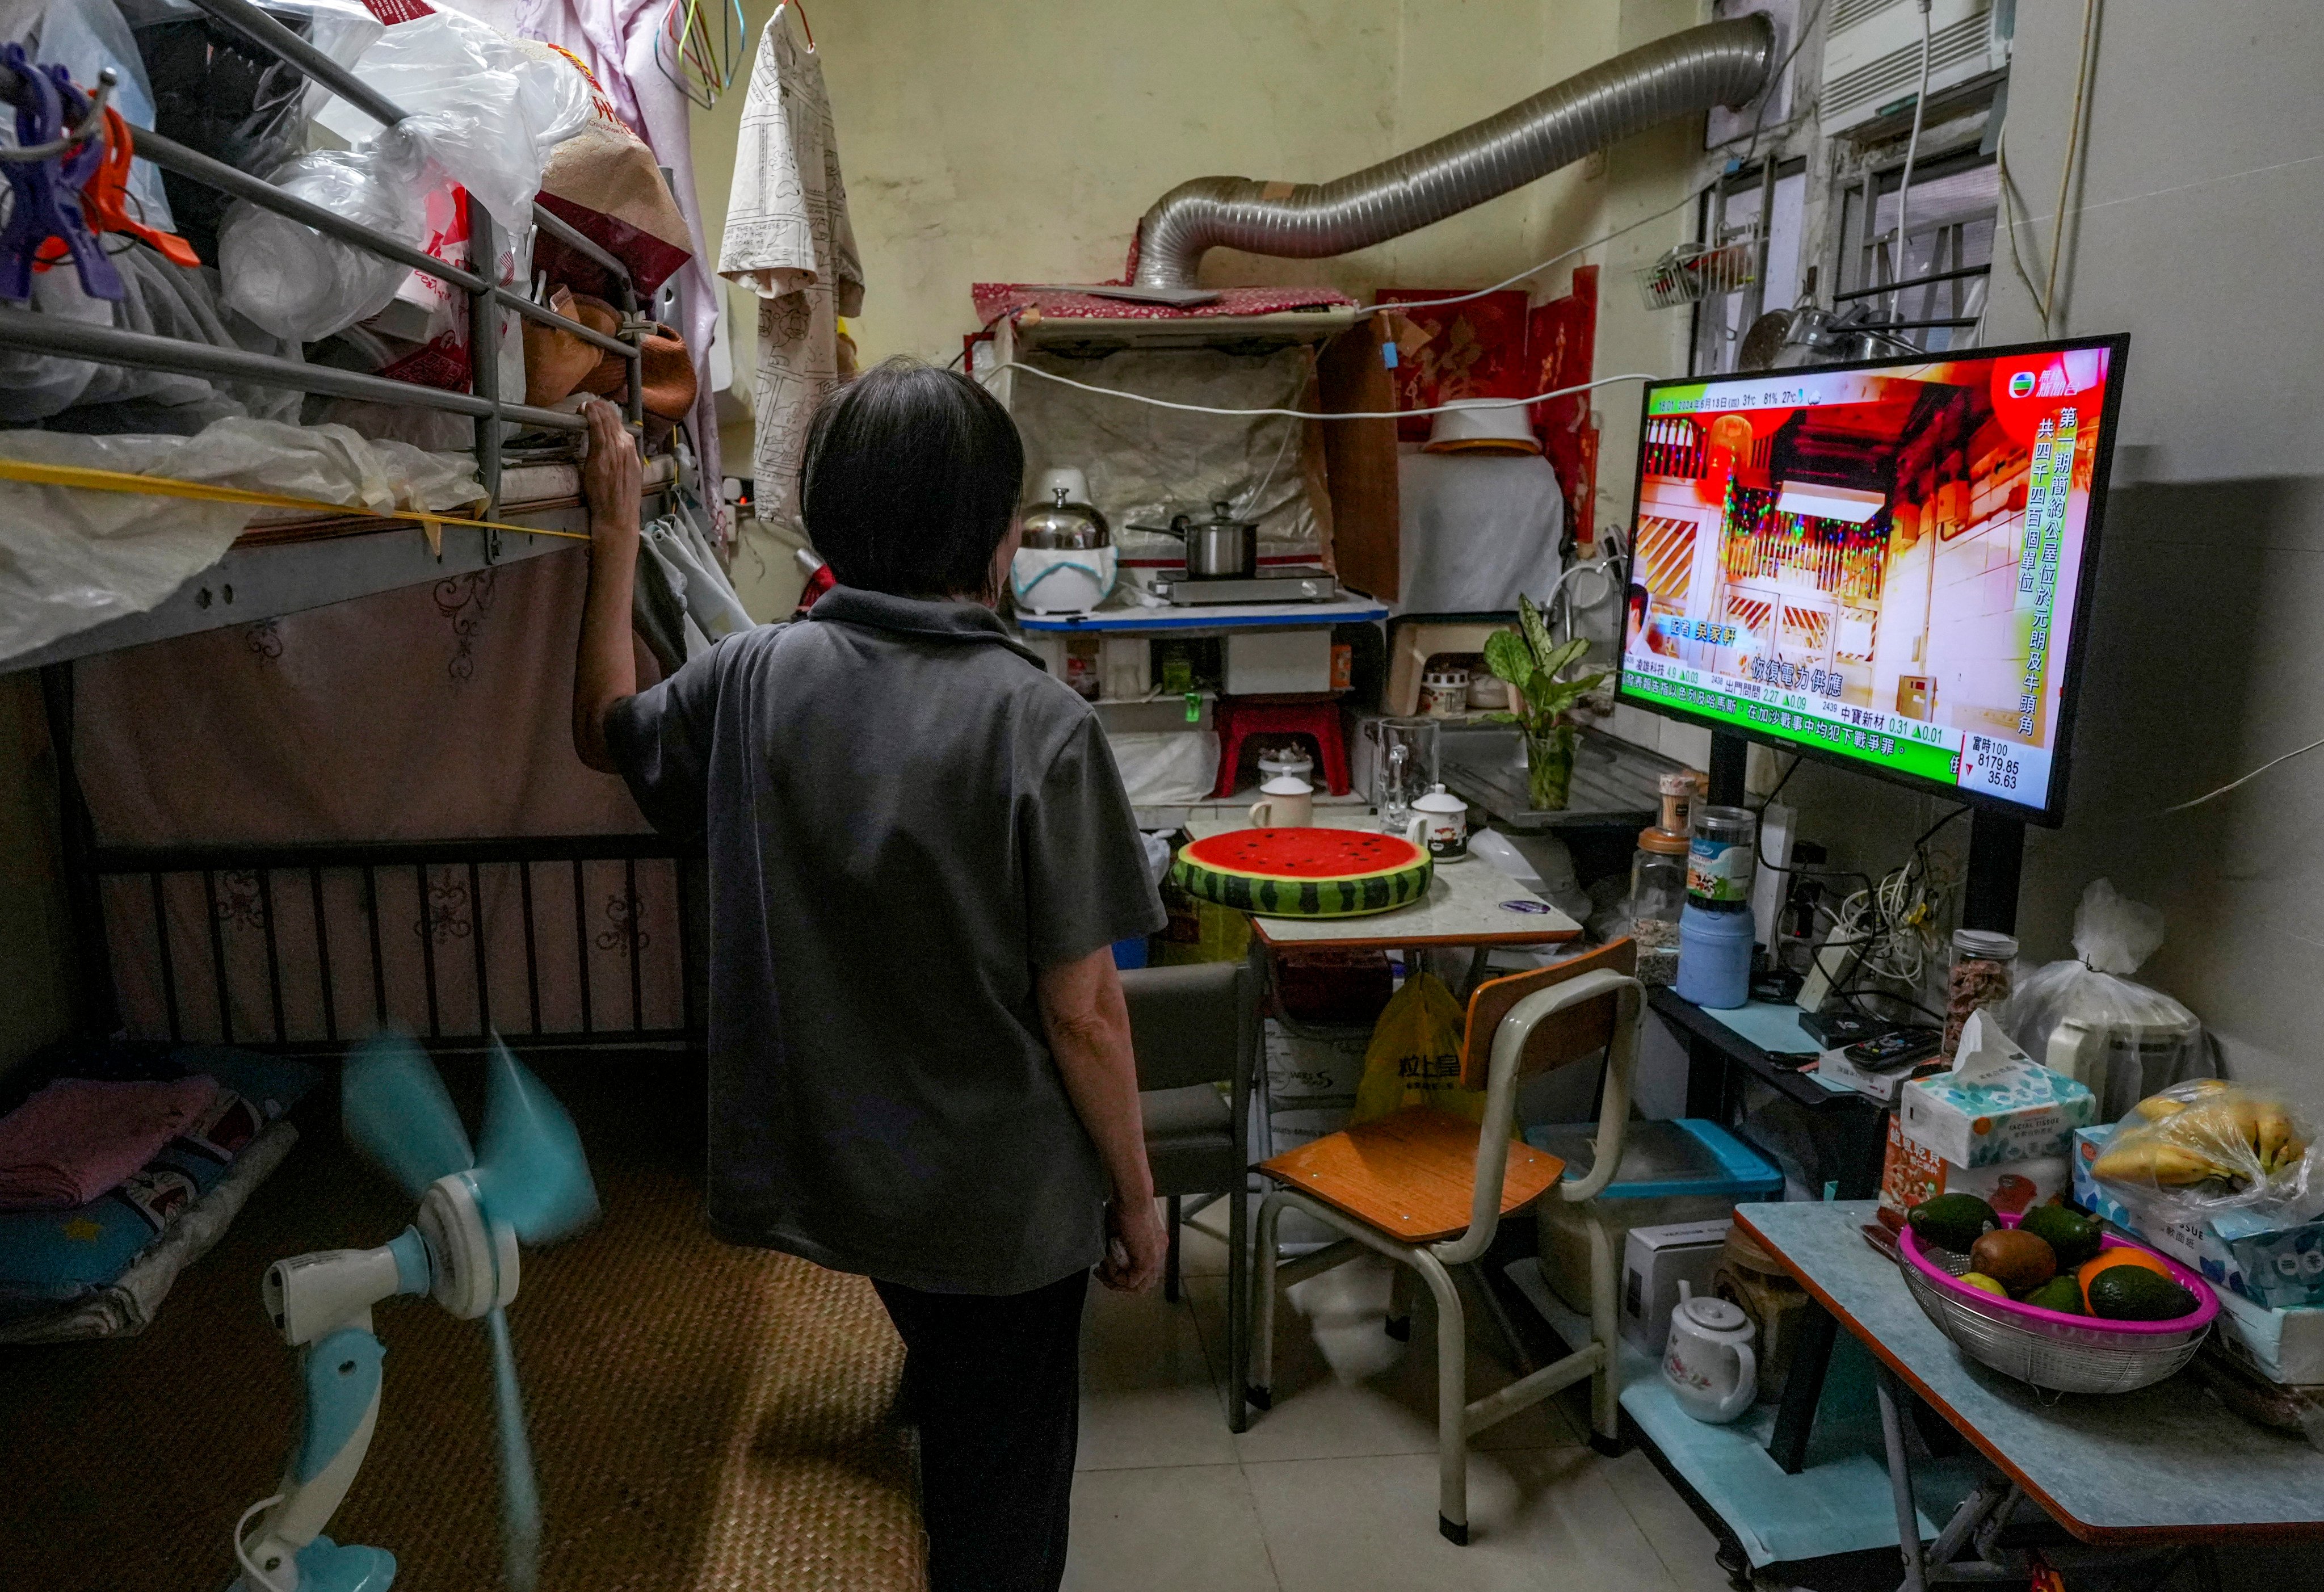 At least 220,000 people in the city live in subdivided flats, which are notorious for hygiene, safety and security hazards. Photo: Sun Yeung